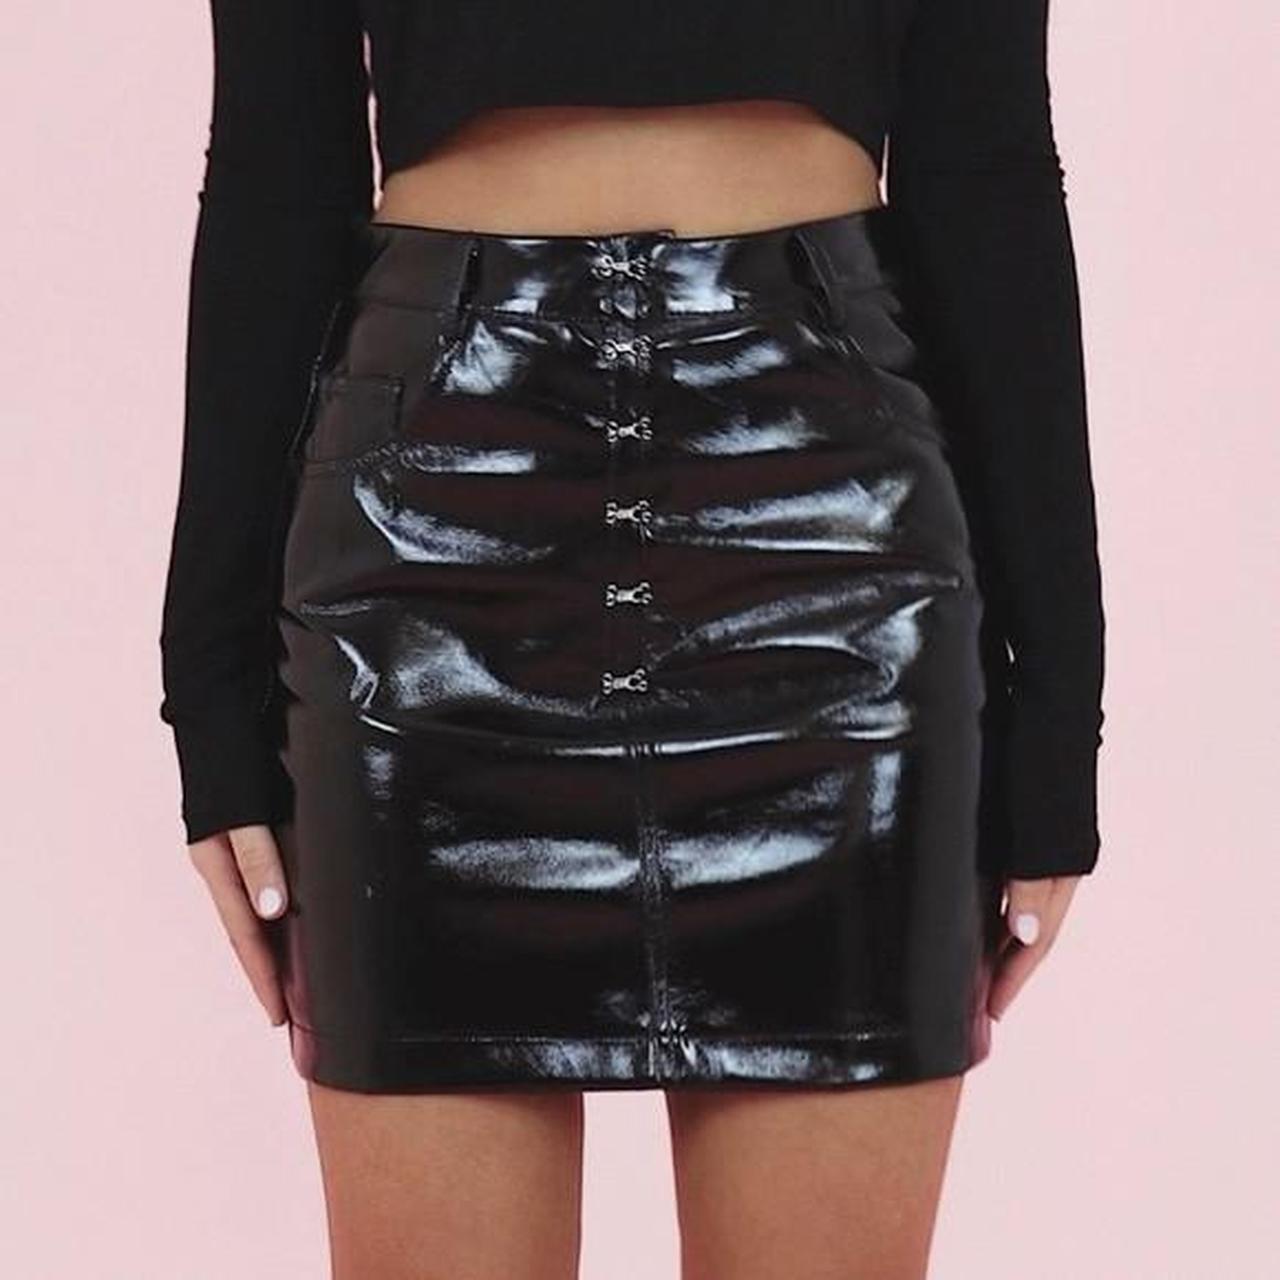 Women's Black and Silver Skirt